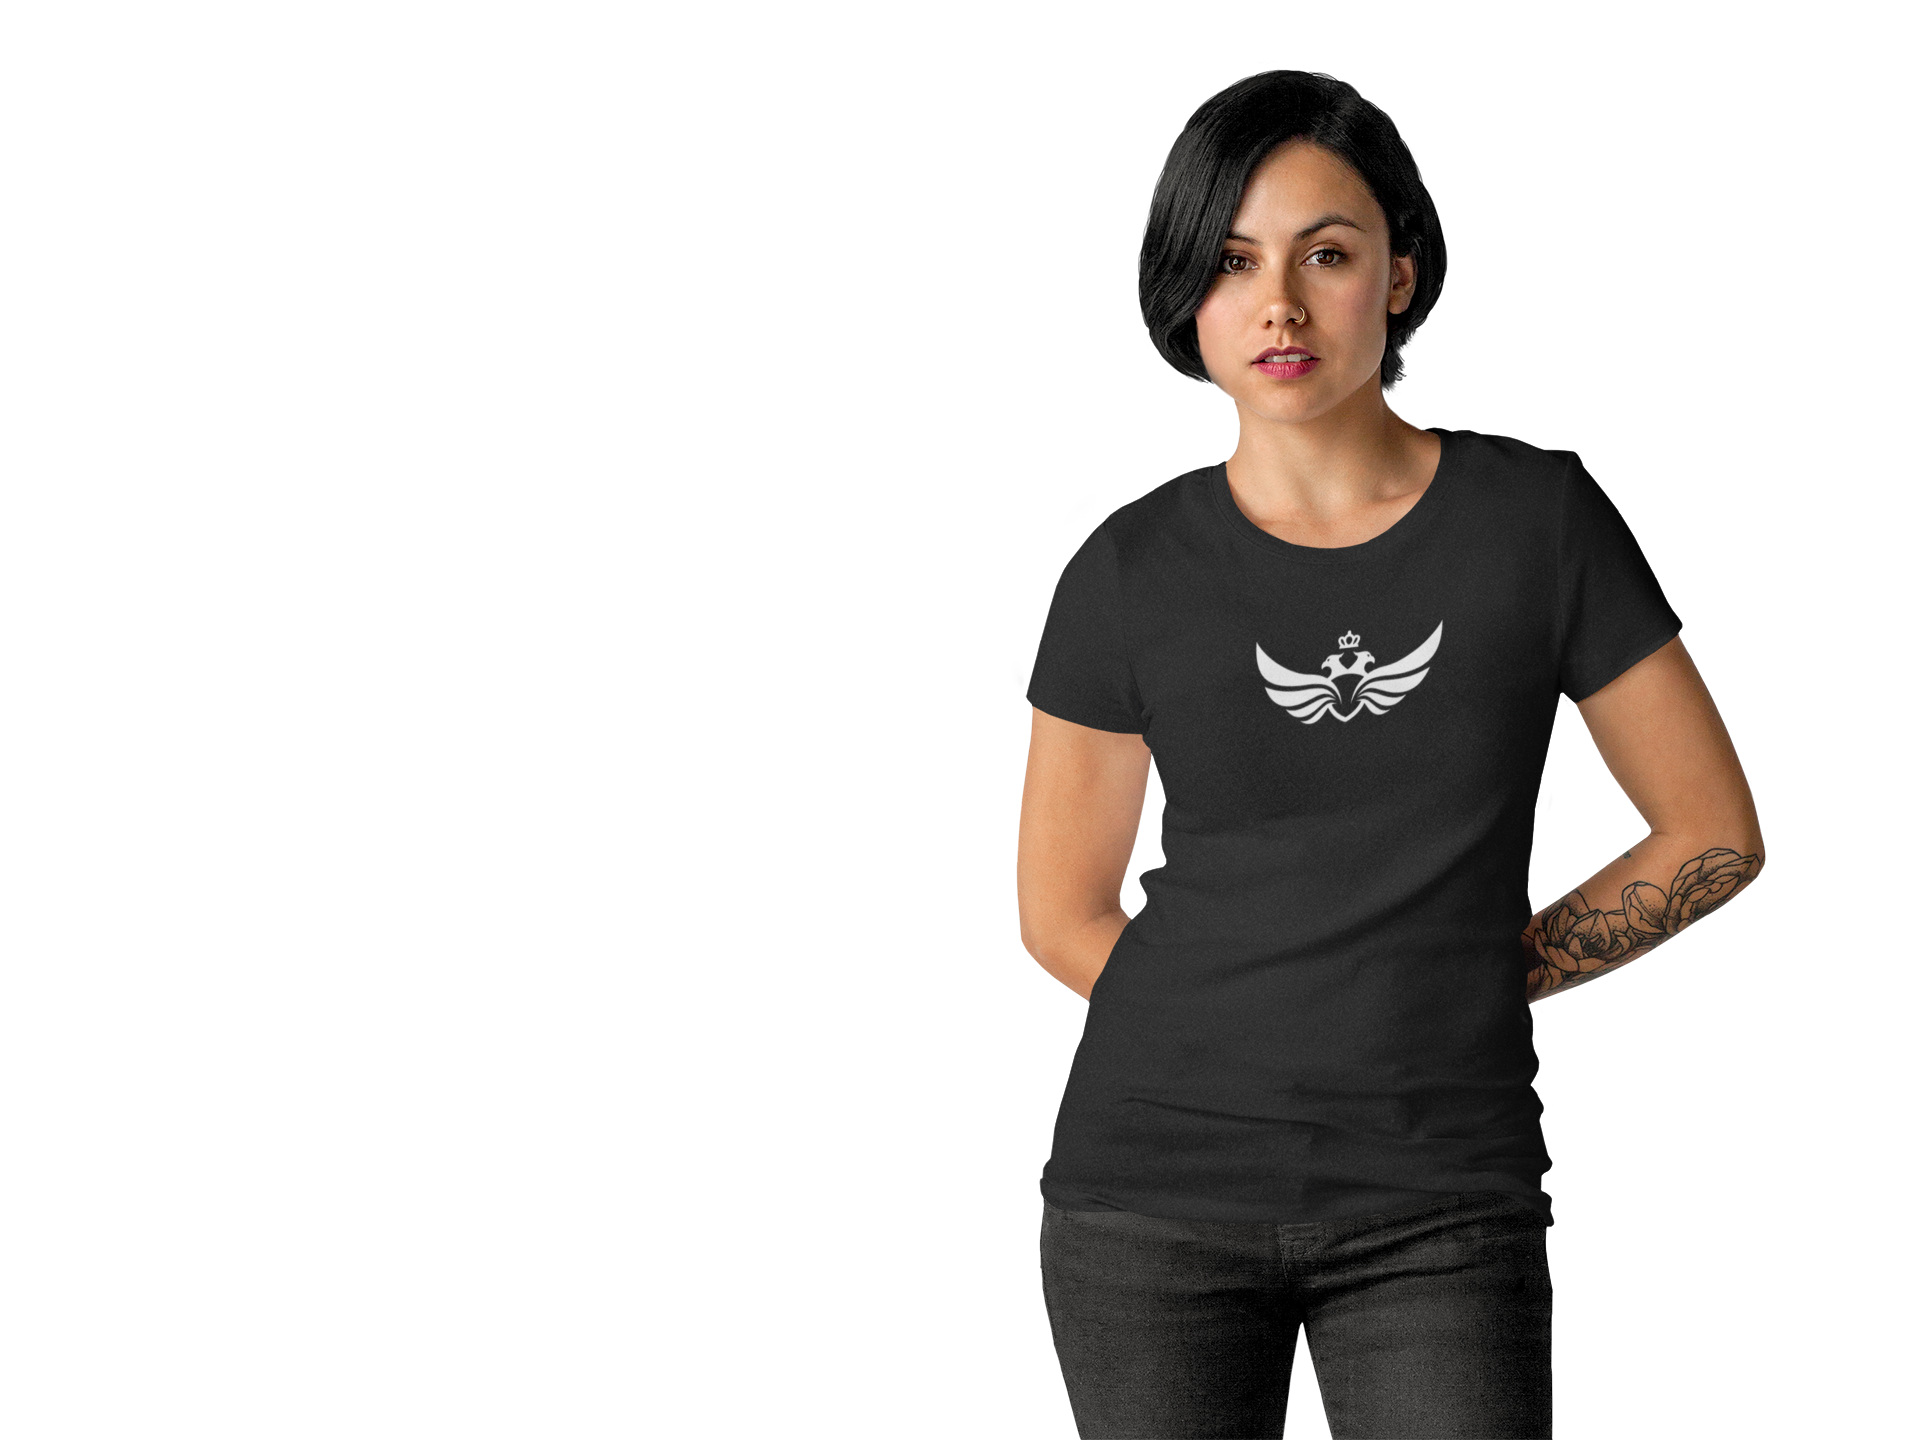 Download t-shirt-mockup-template-of-a-tattooed-woman-over ...